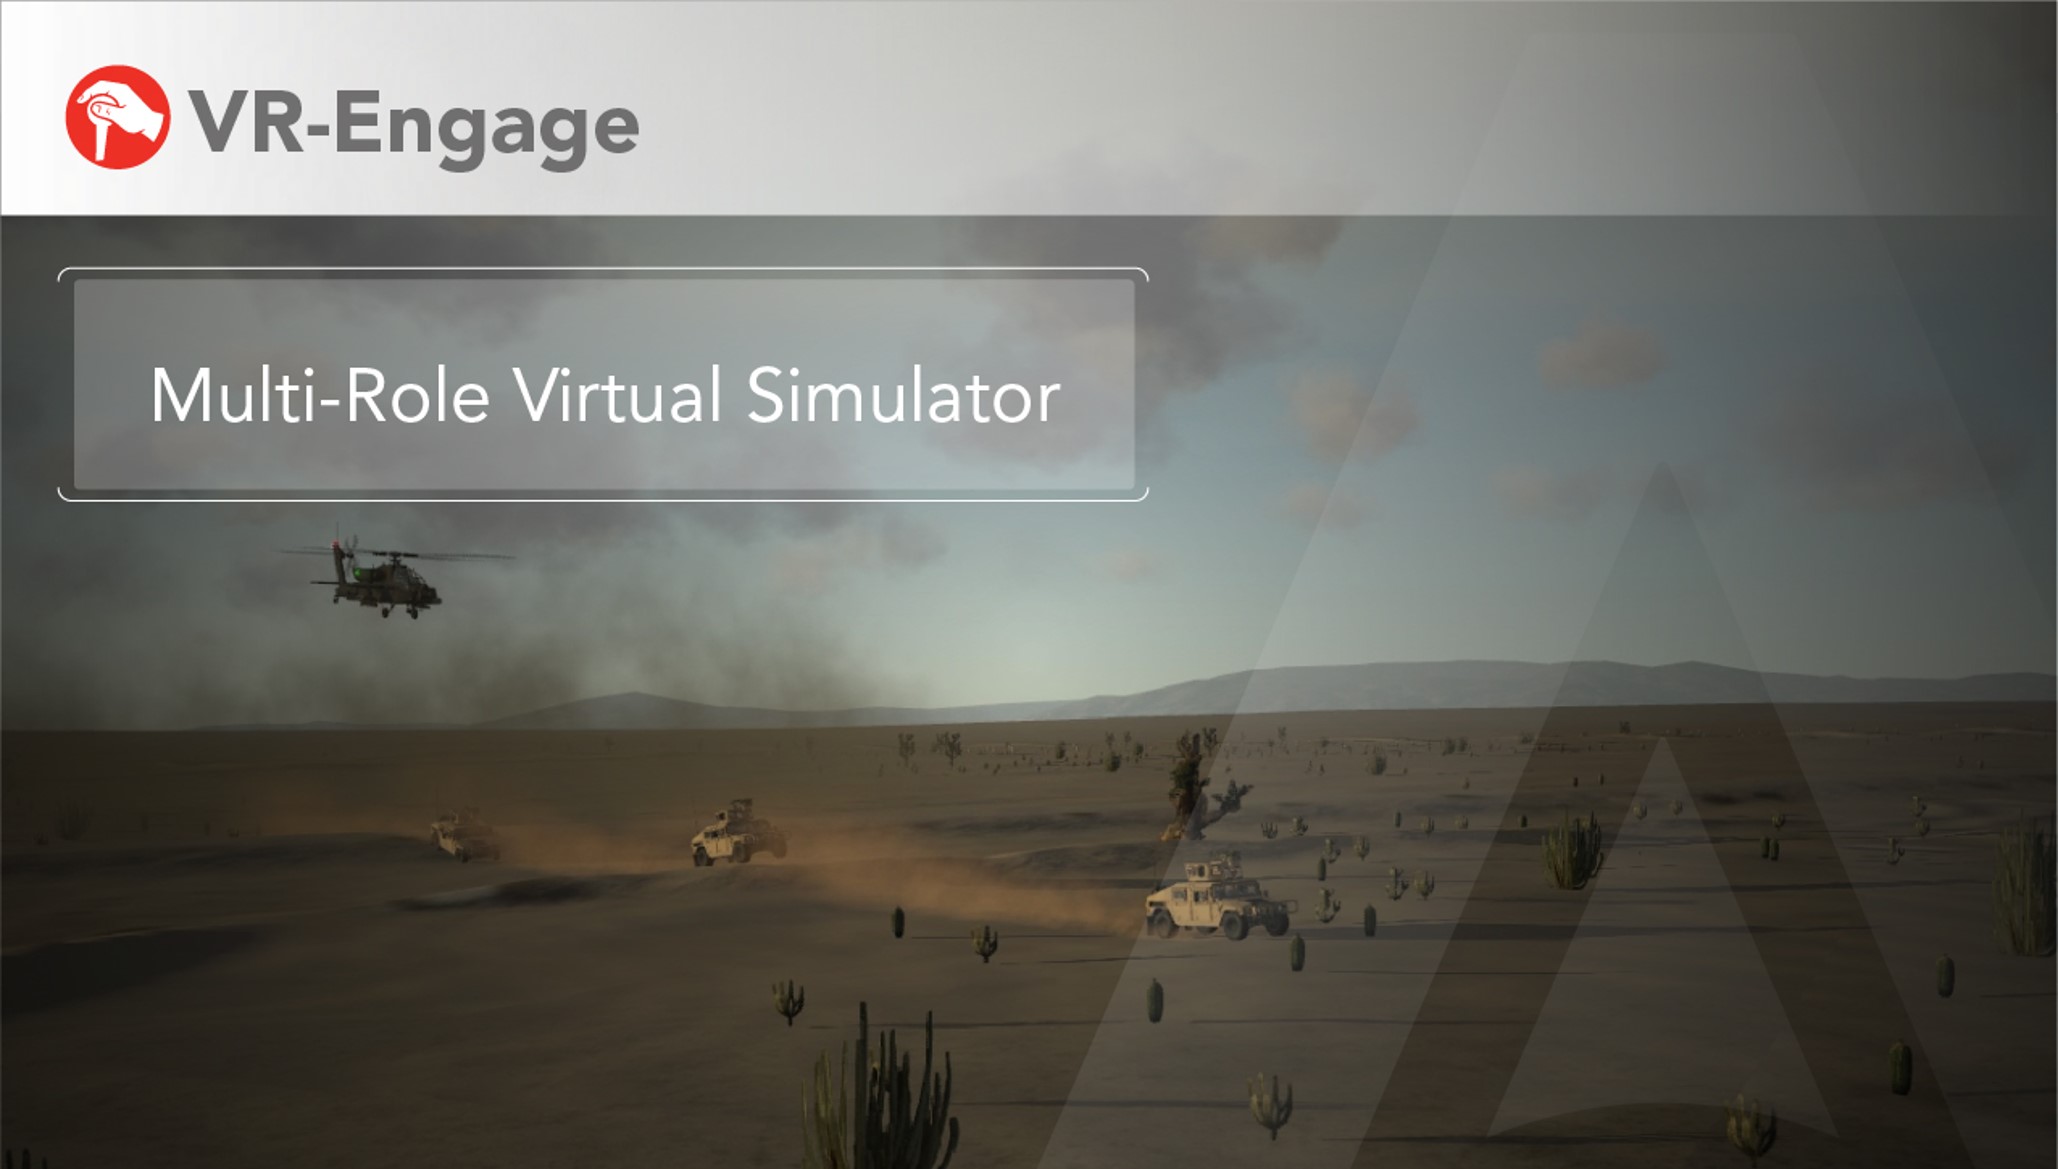 How to Configure MAK ONE’s VR-Engage Virtual Simulator with Accurate Vehicle Dynamics based on an Existing Model